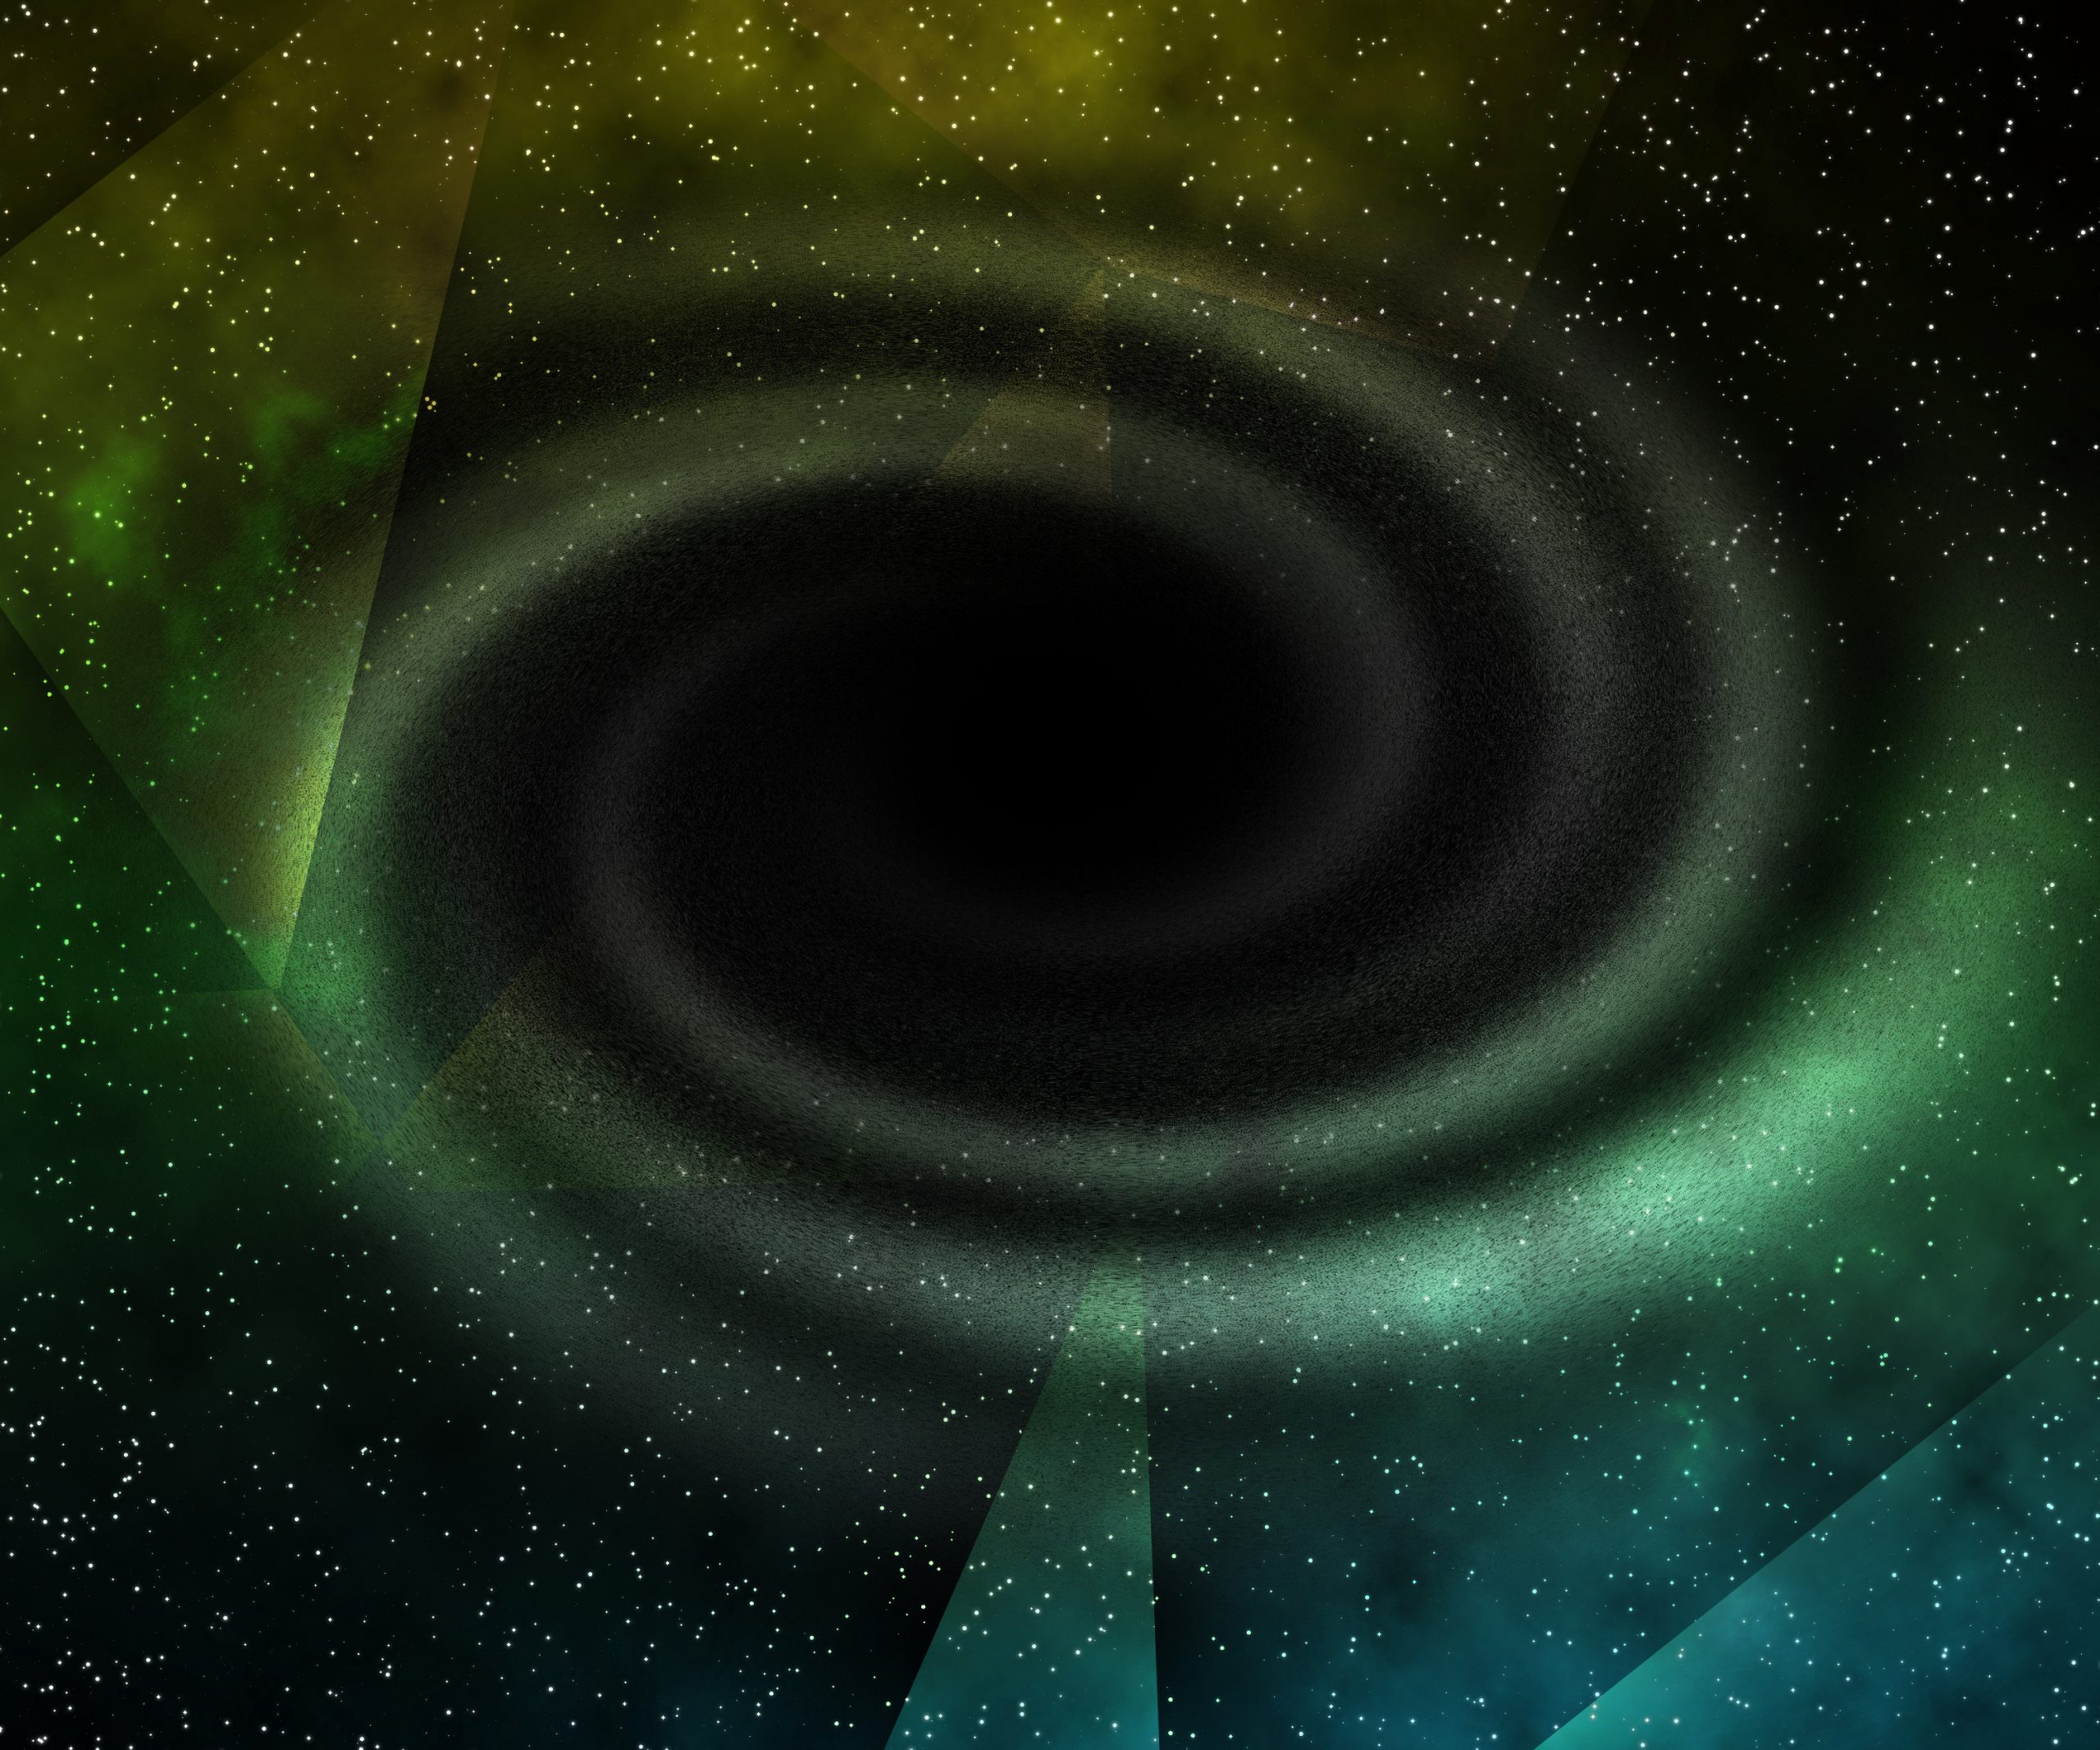 green-black-hole-in-space-background-SBI-300452858